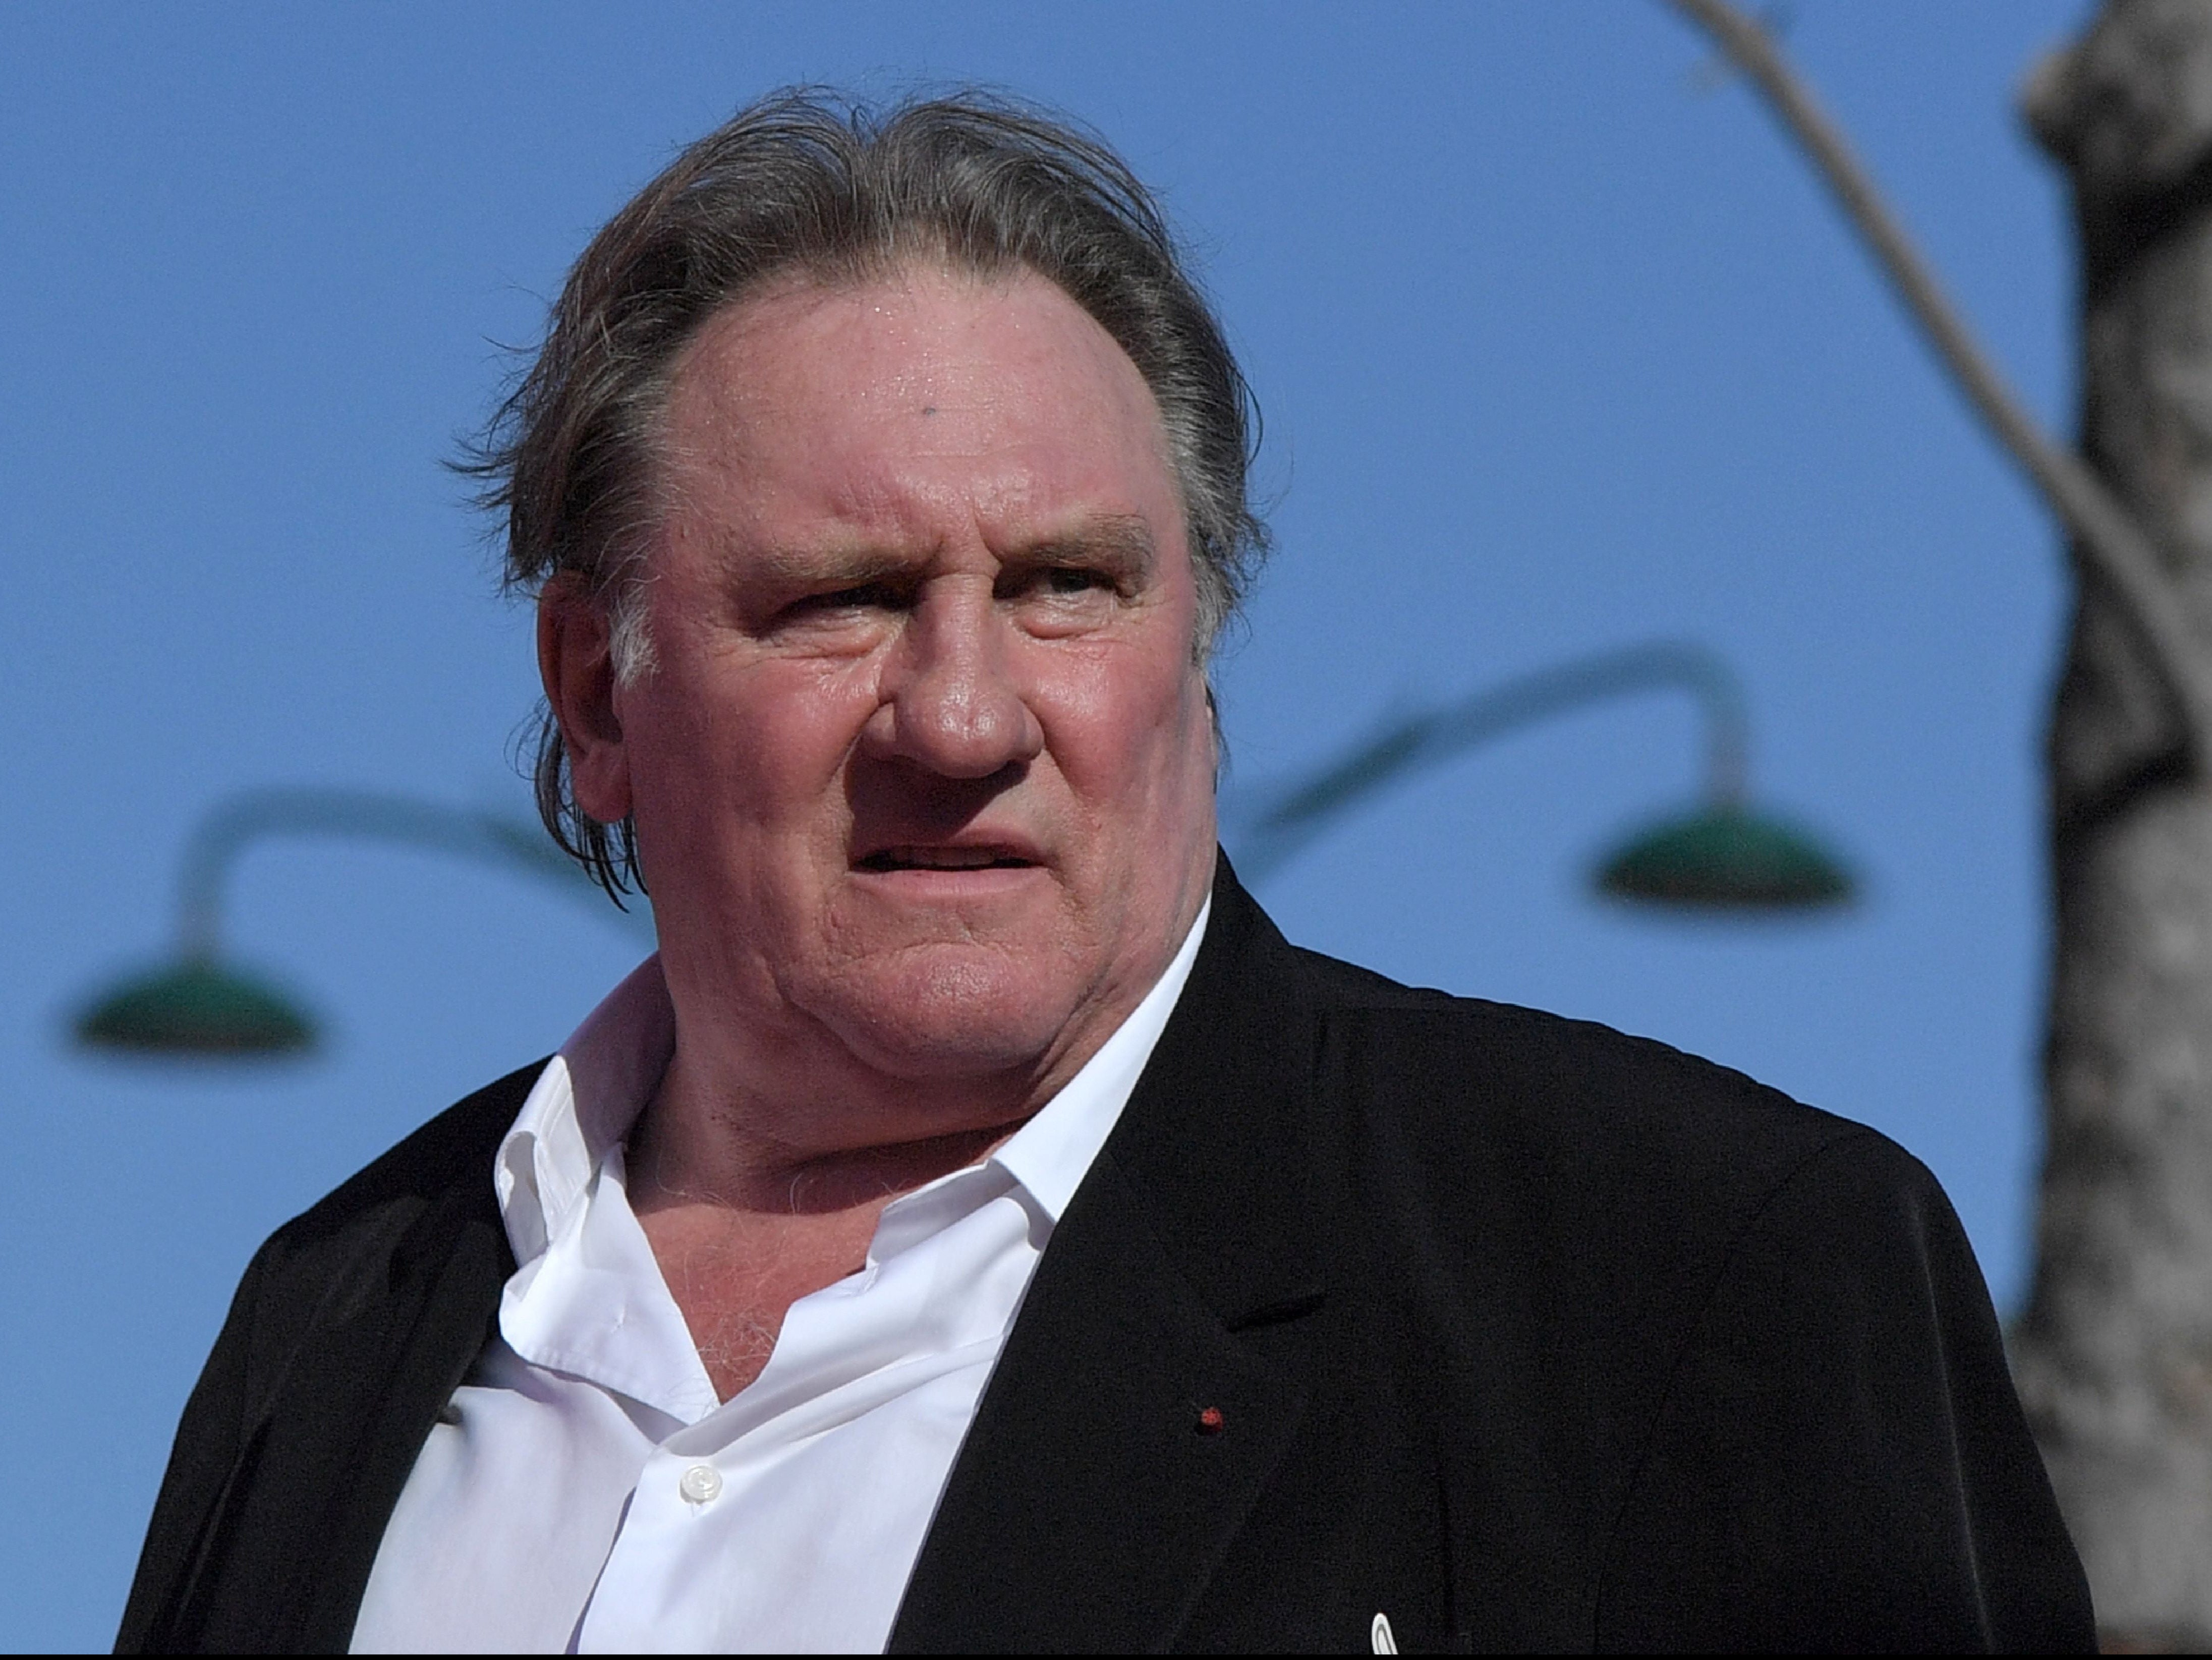 French actor Gerard Depardieu strongly contests rape and sexual assault charges made against him, his lawyer has said